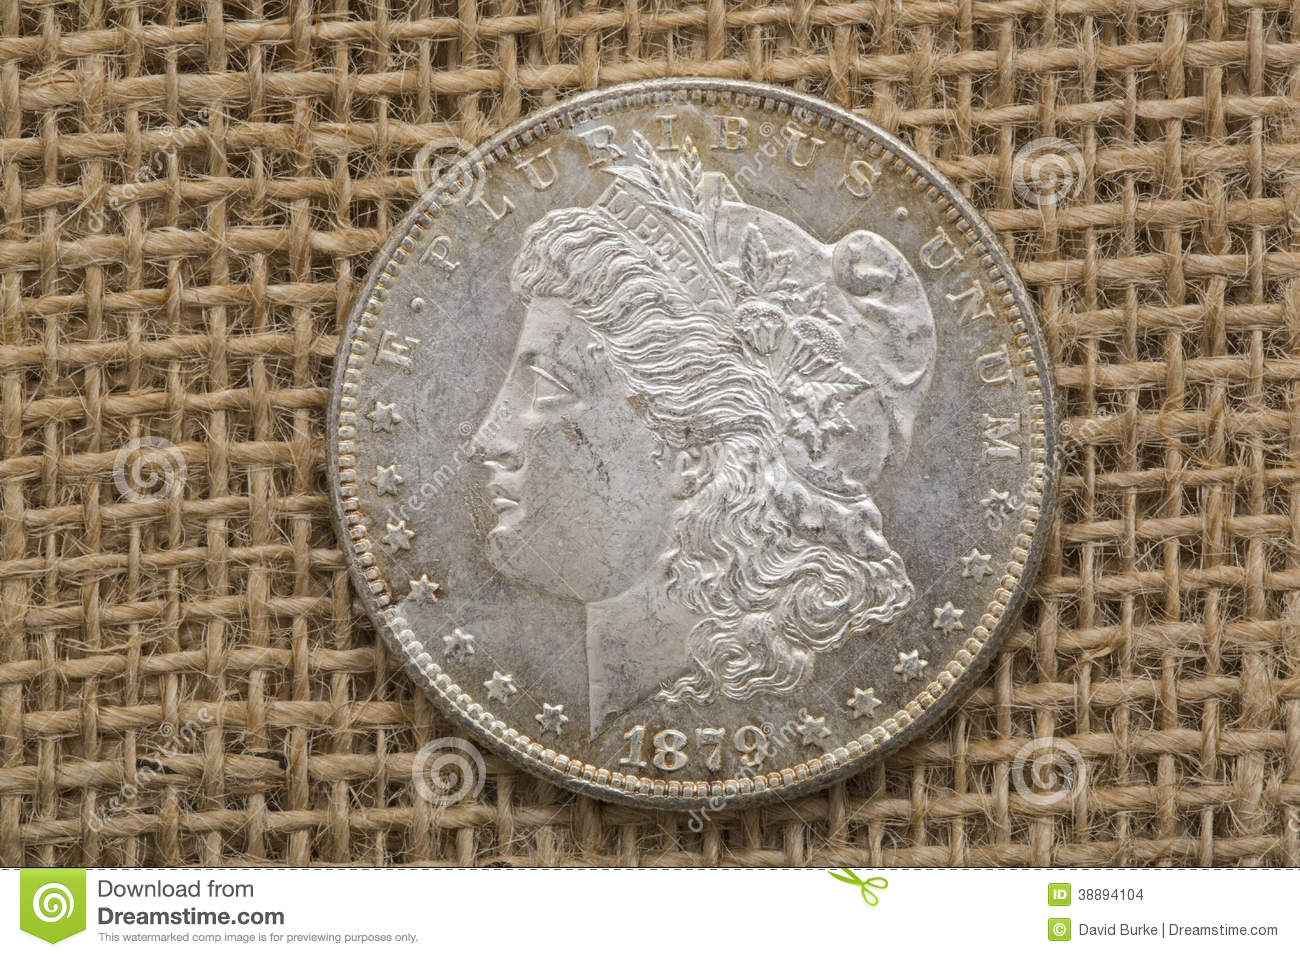 The United States Morgan Silver Dollar Coin Is A Symbol Of American